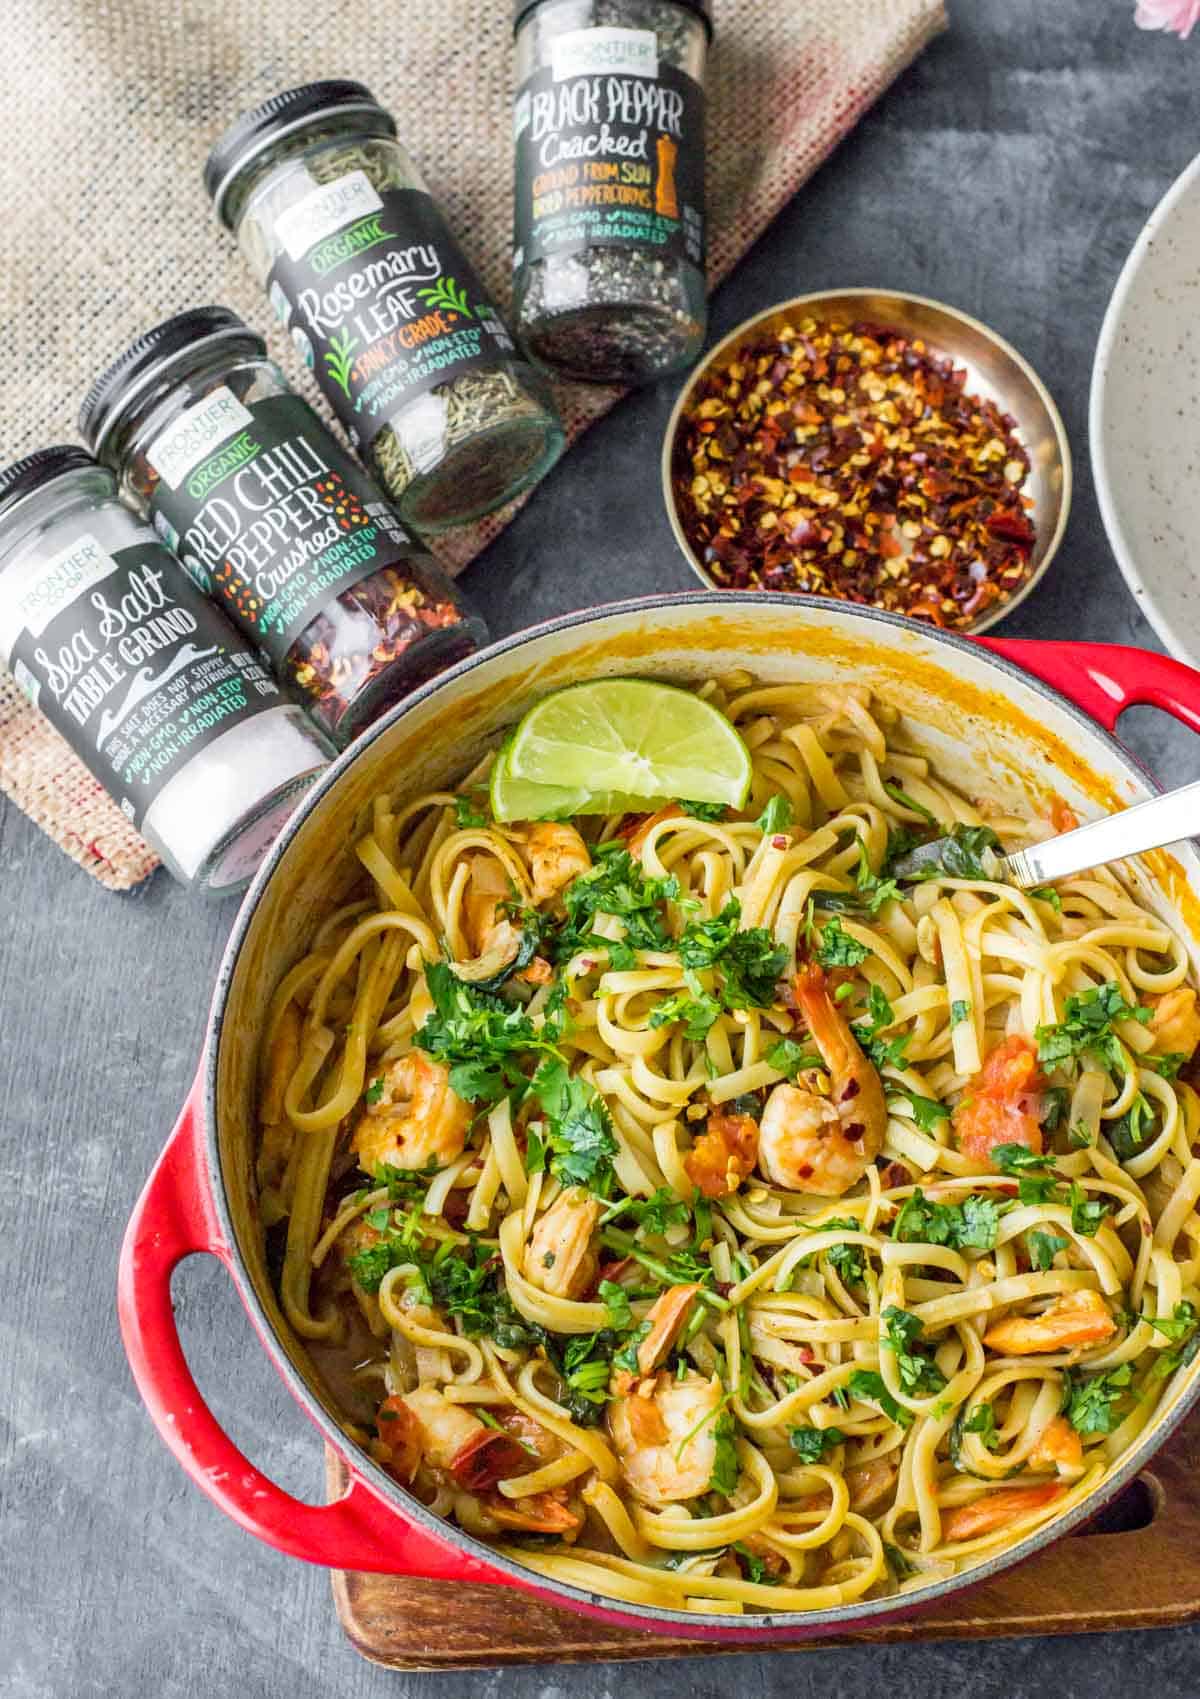 One pot creamy curry pasta with shrimp is a perfect marriage of Indian flavors with Italian produce. It is effortless to make and you can dish up this quick and satisfying supper in about 30 minutes.